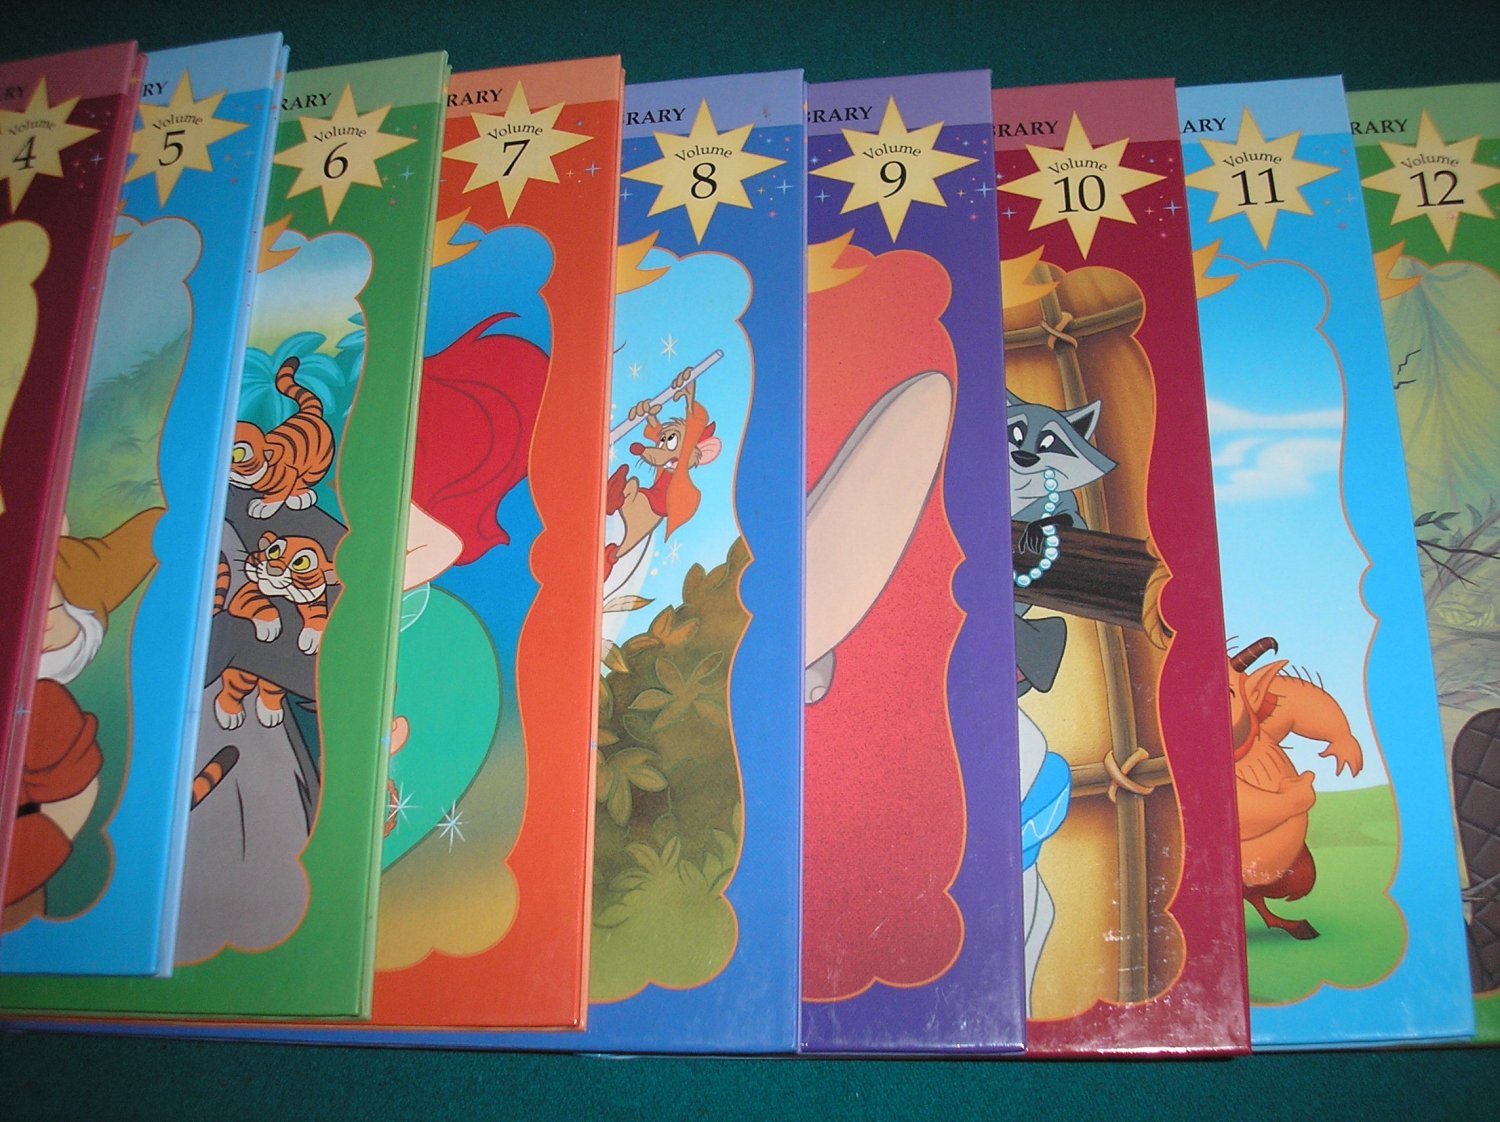 Disneys Storytime Treasures Library Complete 19 Volume Set With Matching Canvas Tote Rare Find 